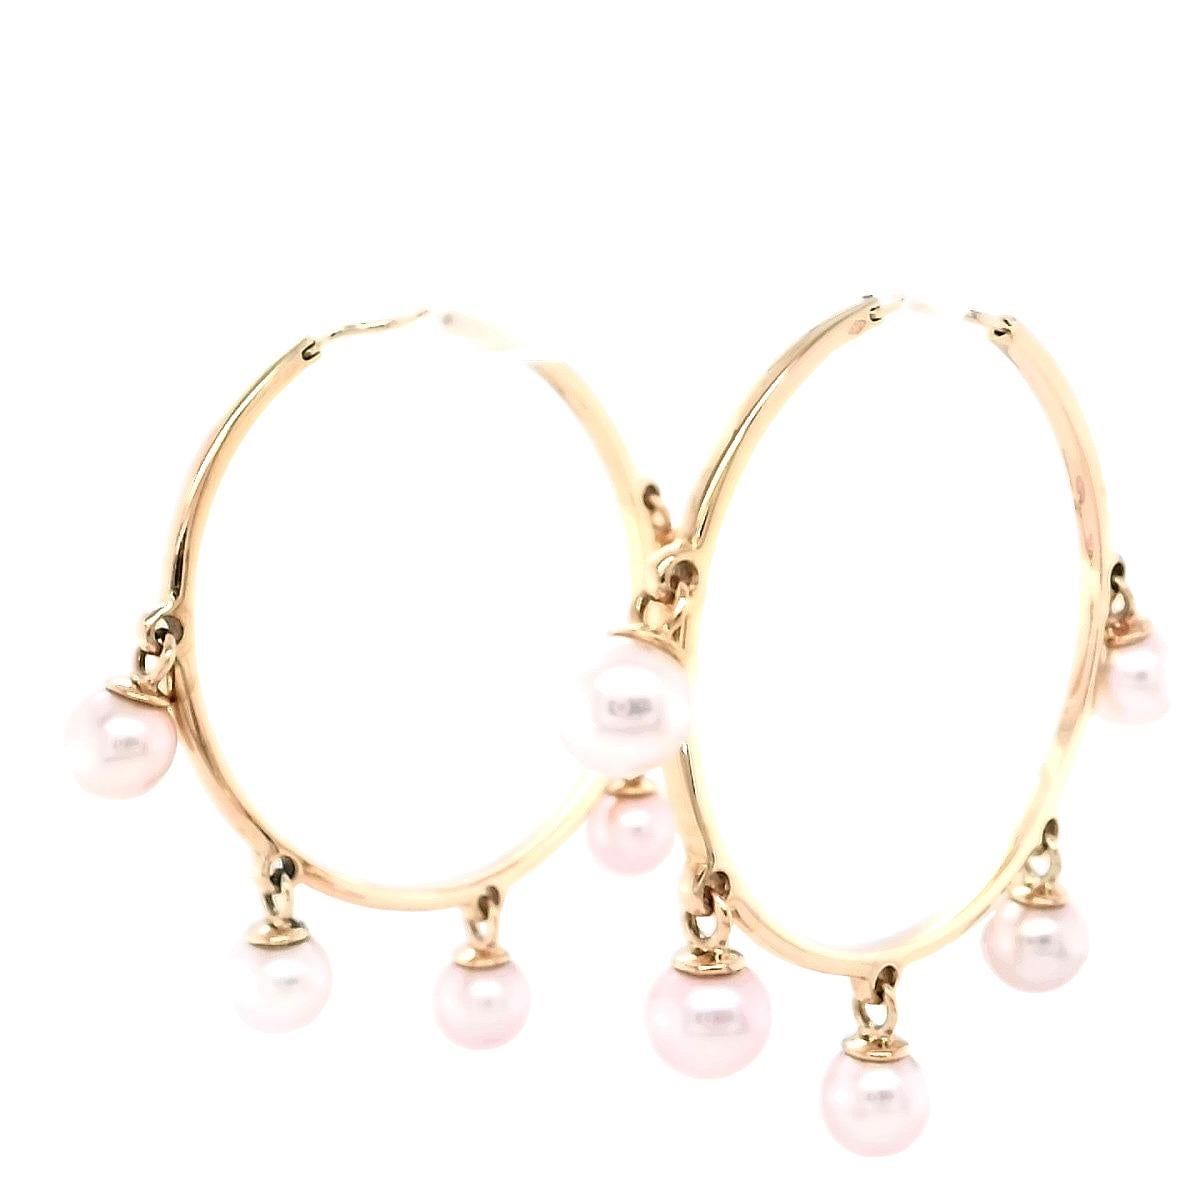 Dior the High jewellery Couture Maison creates these amazing chic earrings as a hoop. 

Crafted beautifully with Cultured Pearl drops, individually moving bringing out beautiful lustre from each pearl. 

Amazing condition, very little marks, hooks